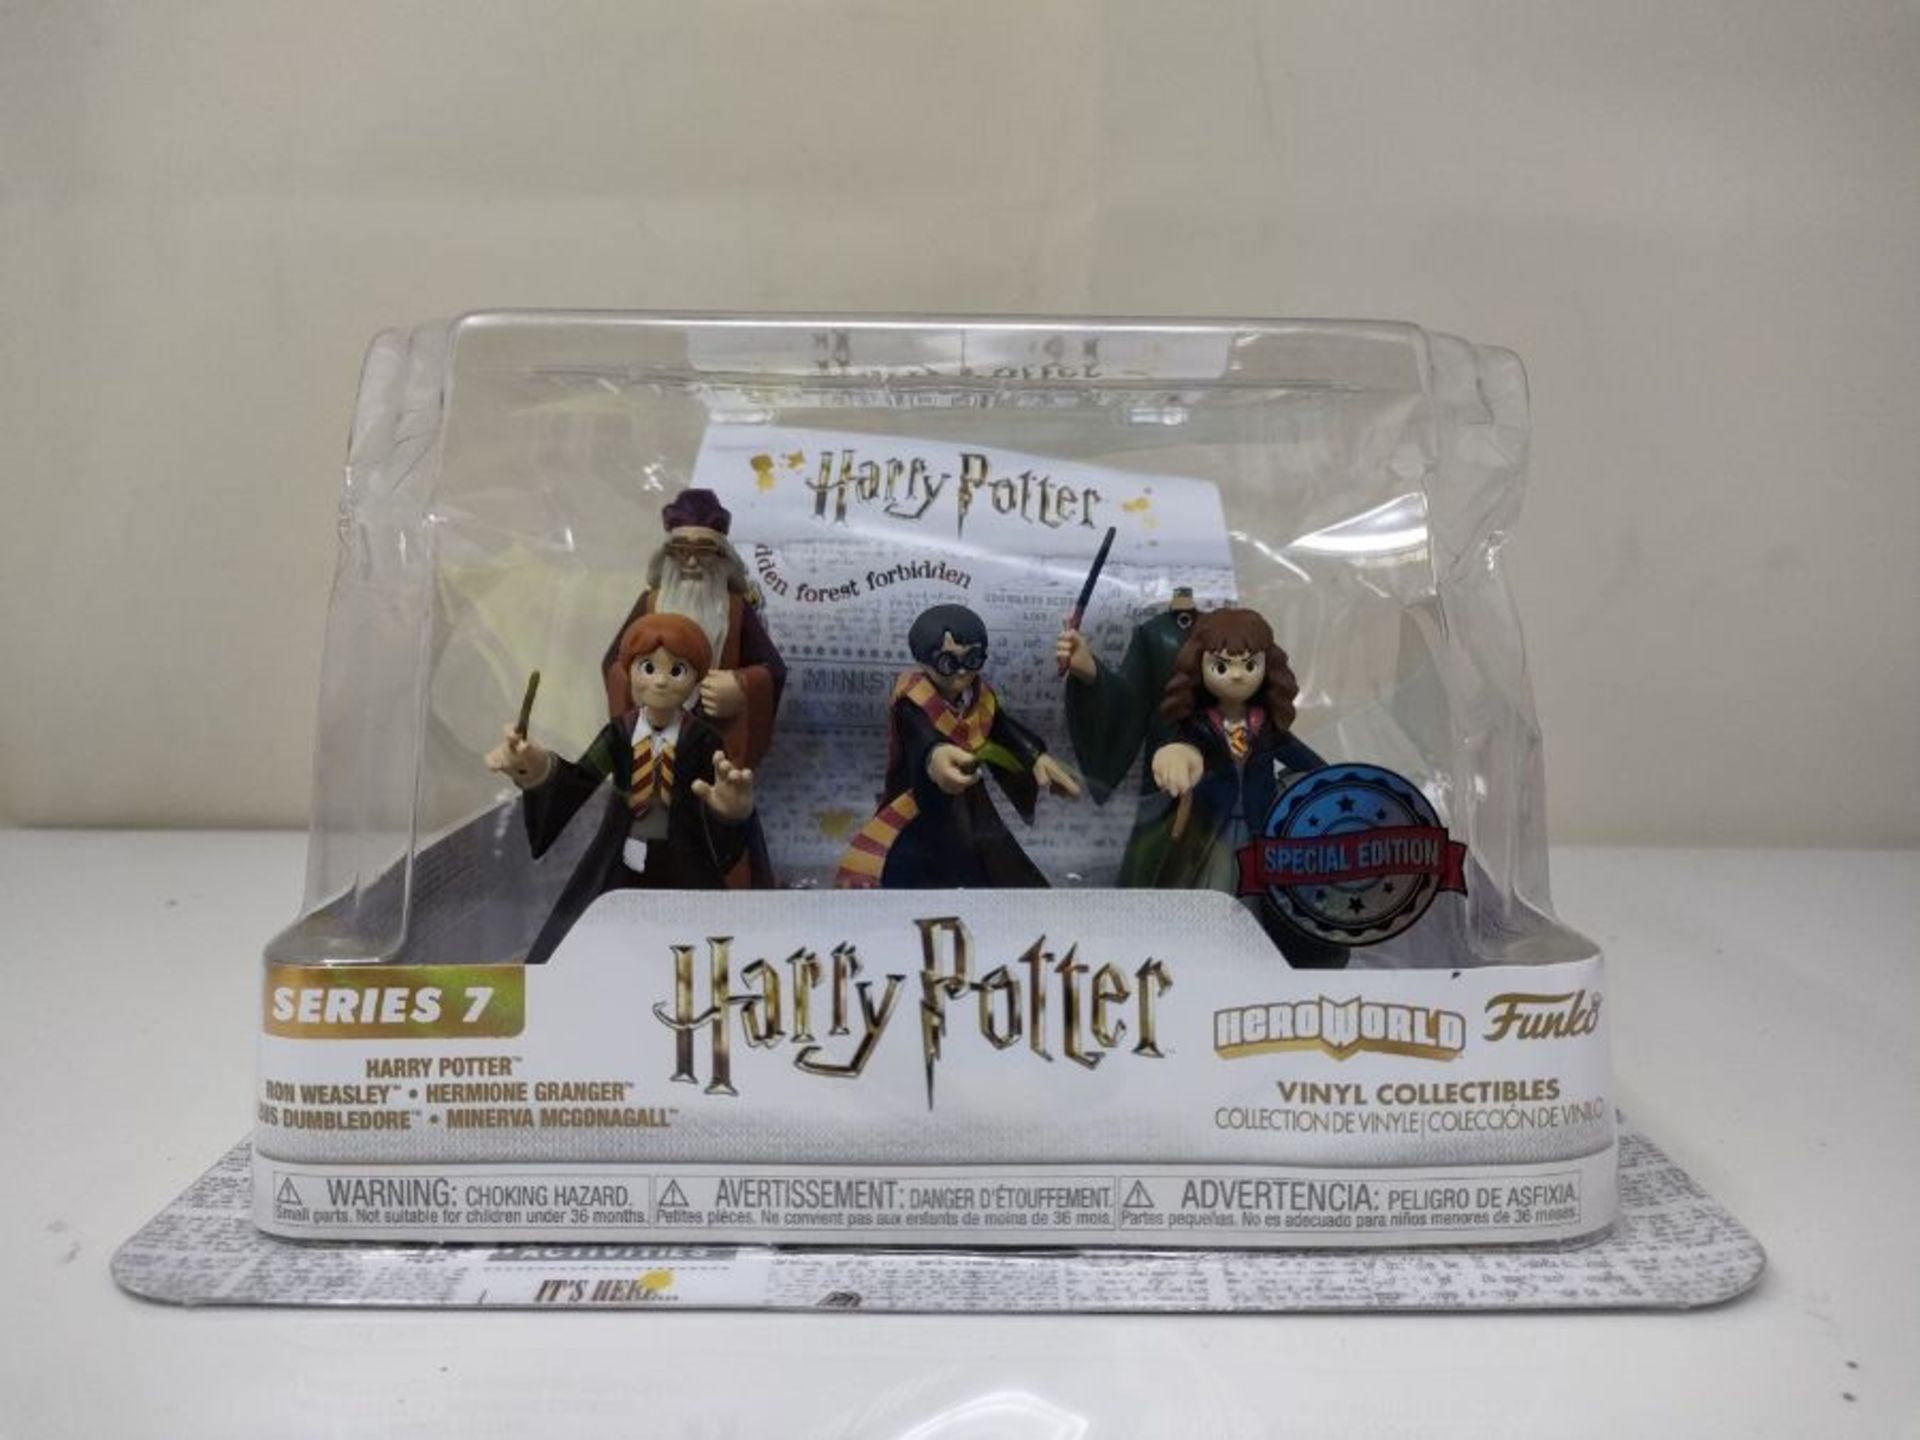 [CRACKED] Hero World Funko Harry Potter [Series 7] Vinyl Collectibles 5 Pack - Image 2 of 2